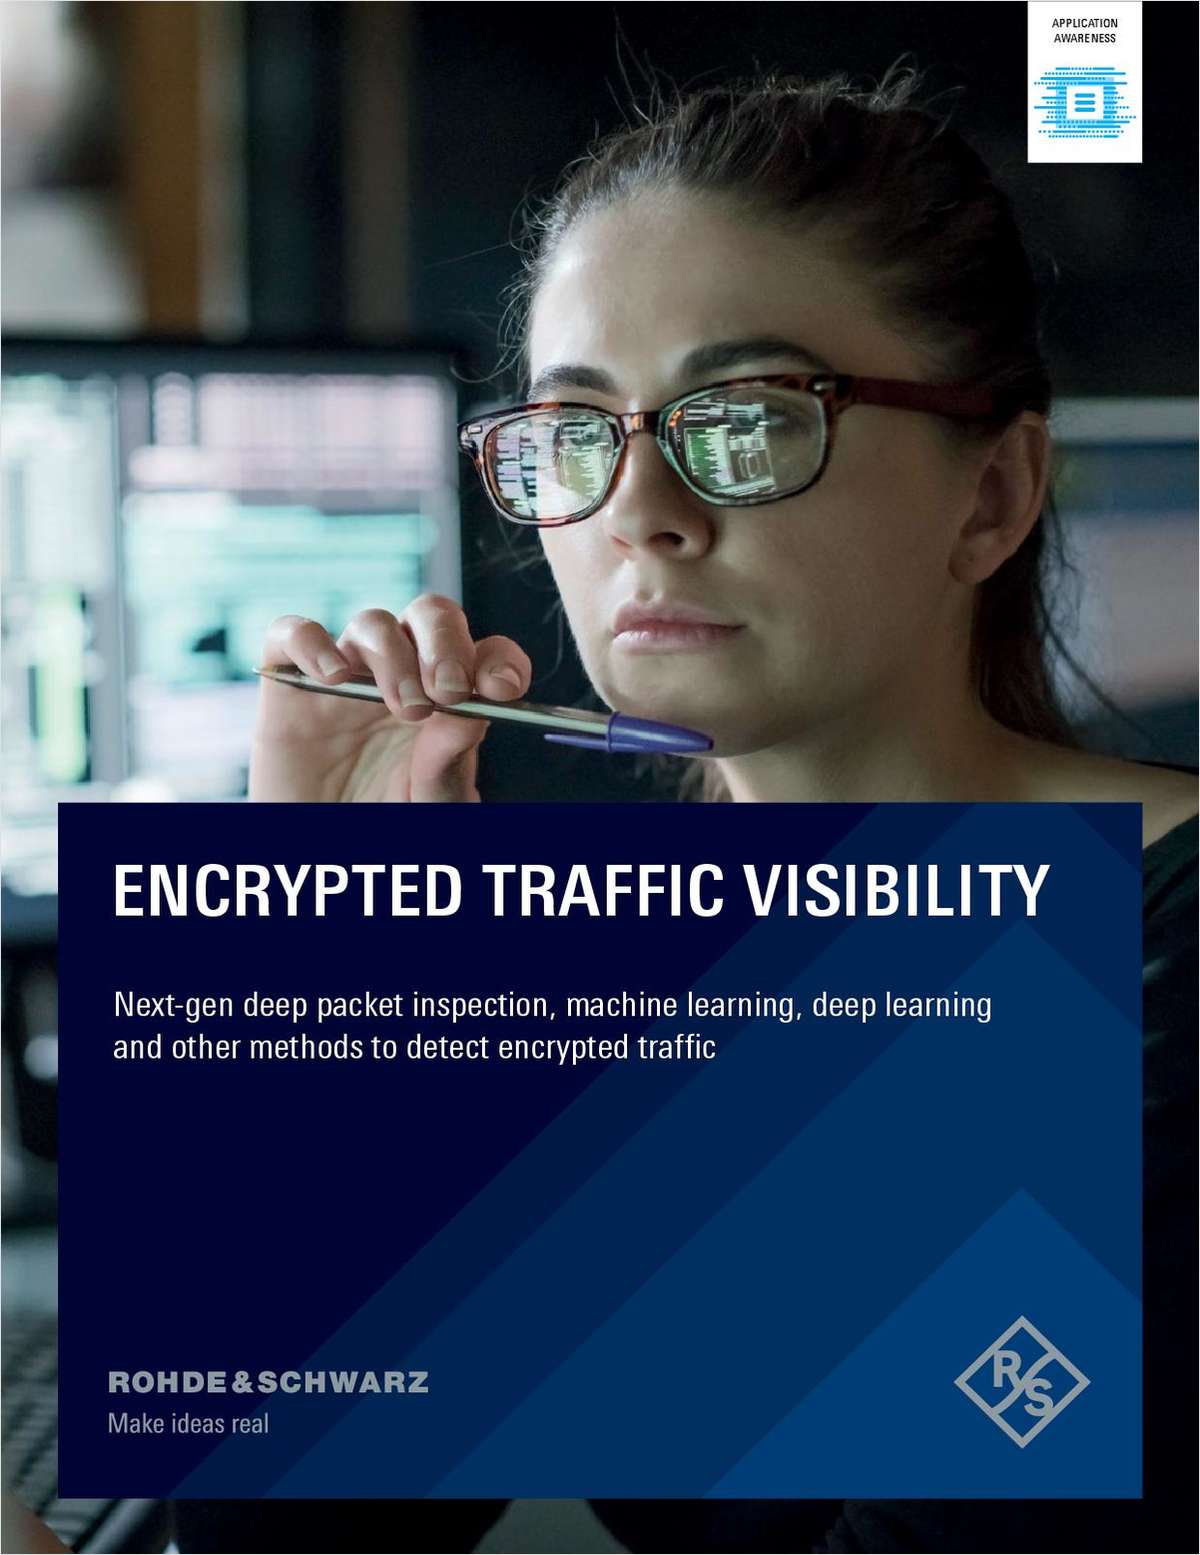 DPI and encrypted traffic visibility for IP networks